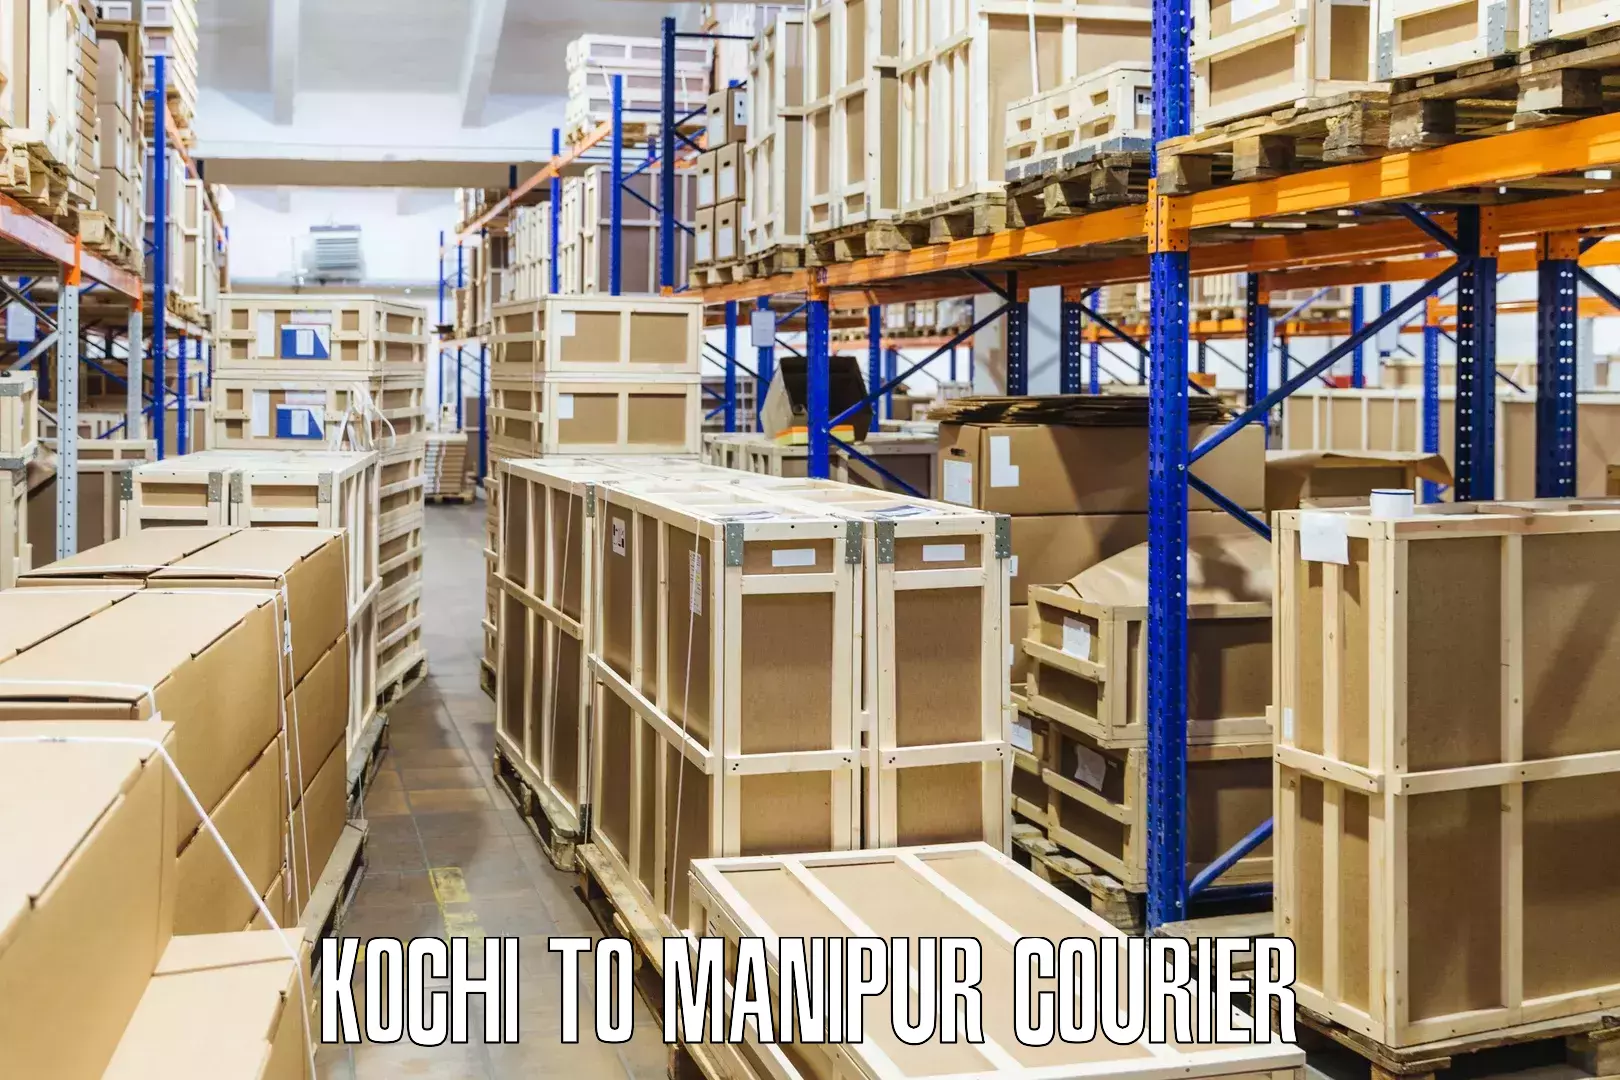 State-of-the-art courier technology Kochi to Manipur